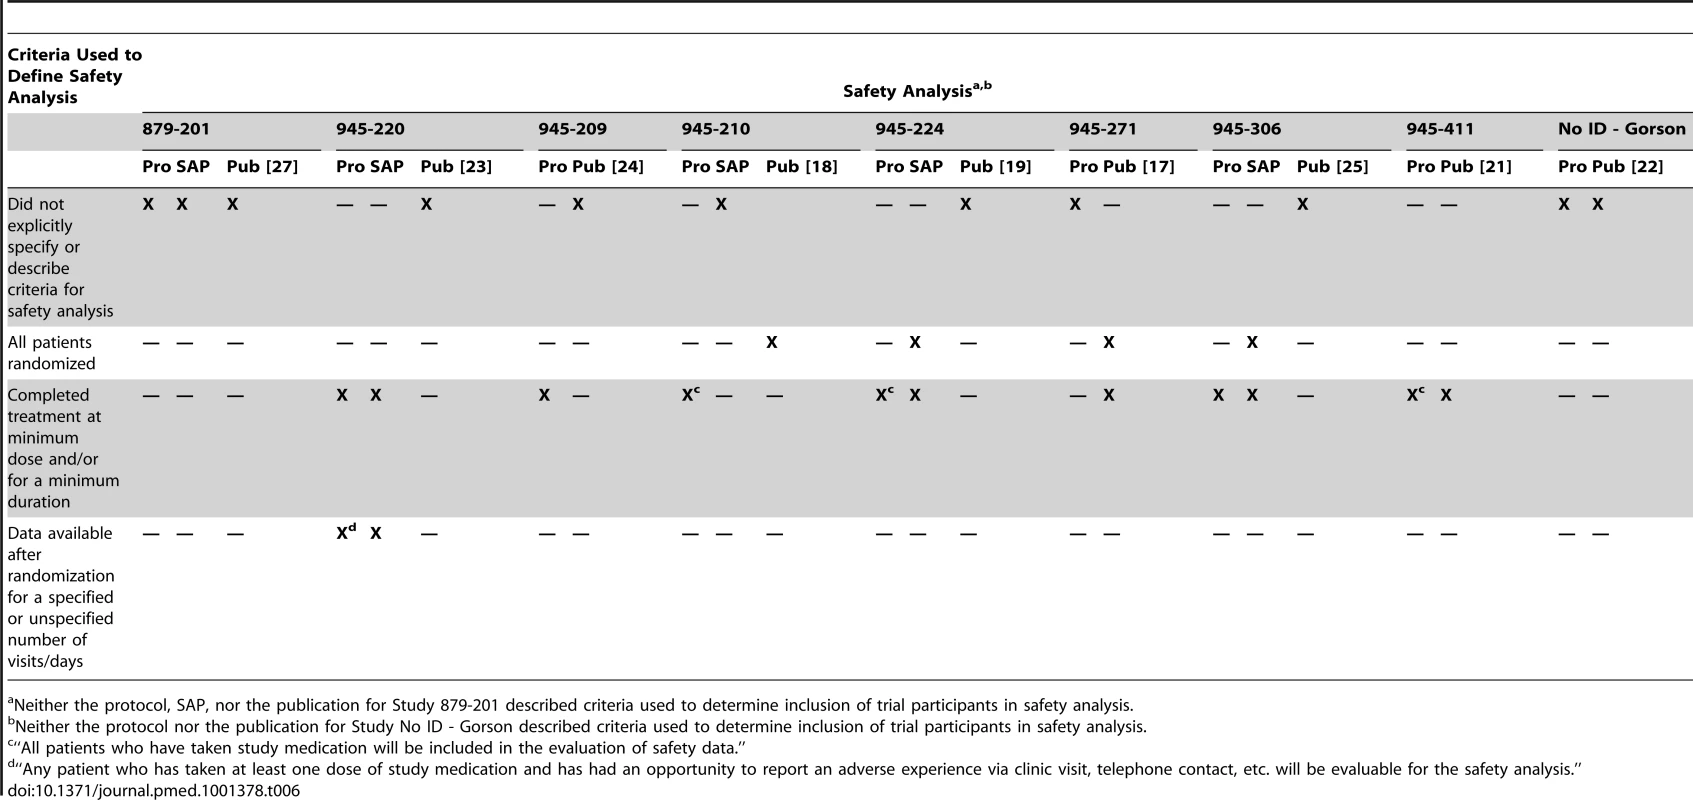 Comparison of protocol (Pro), SAPs, and publications (Pub) for description of criteria used to determine inclusion of trial participants in safety analysis.